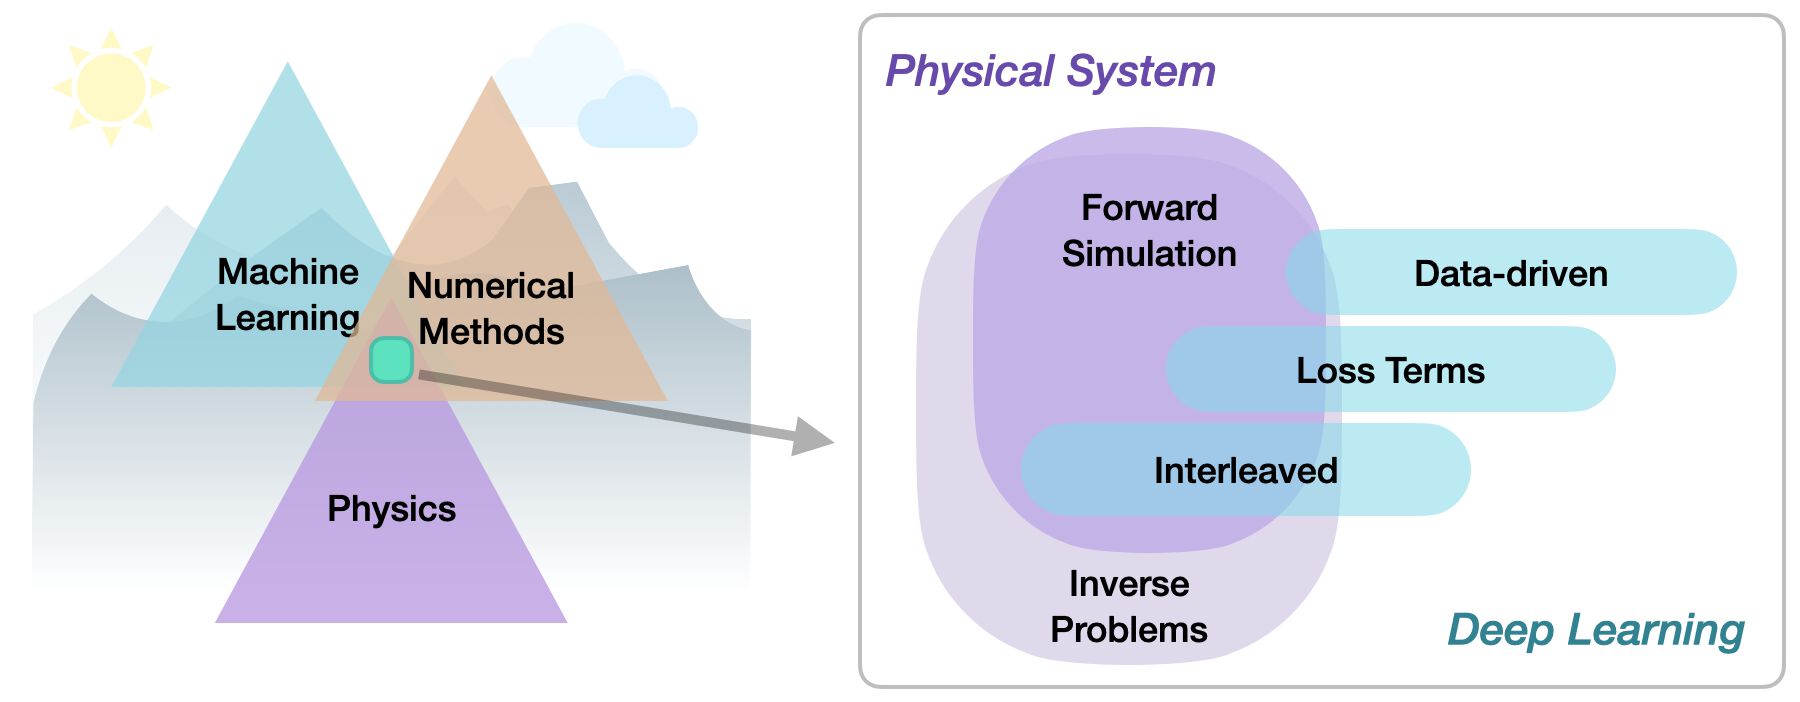 physics-based-deep-learning-overview.jpg